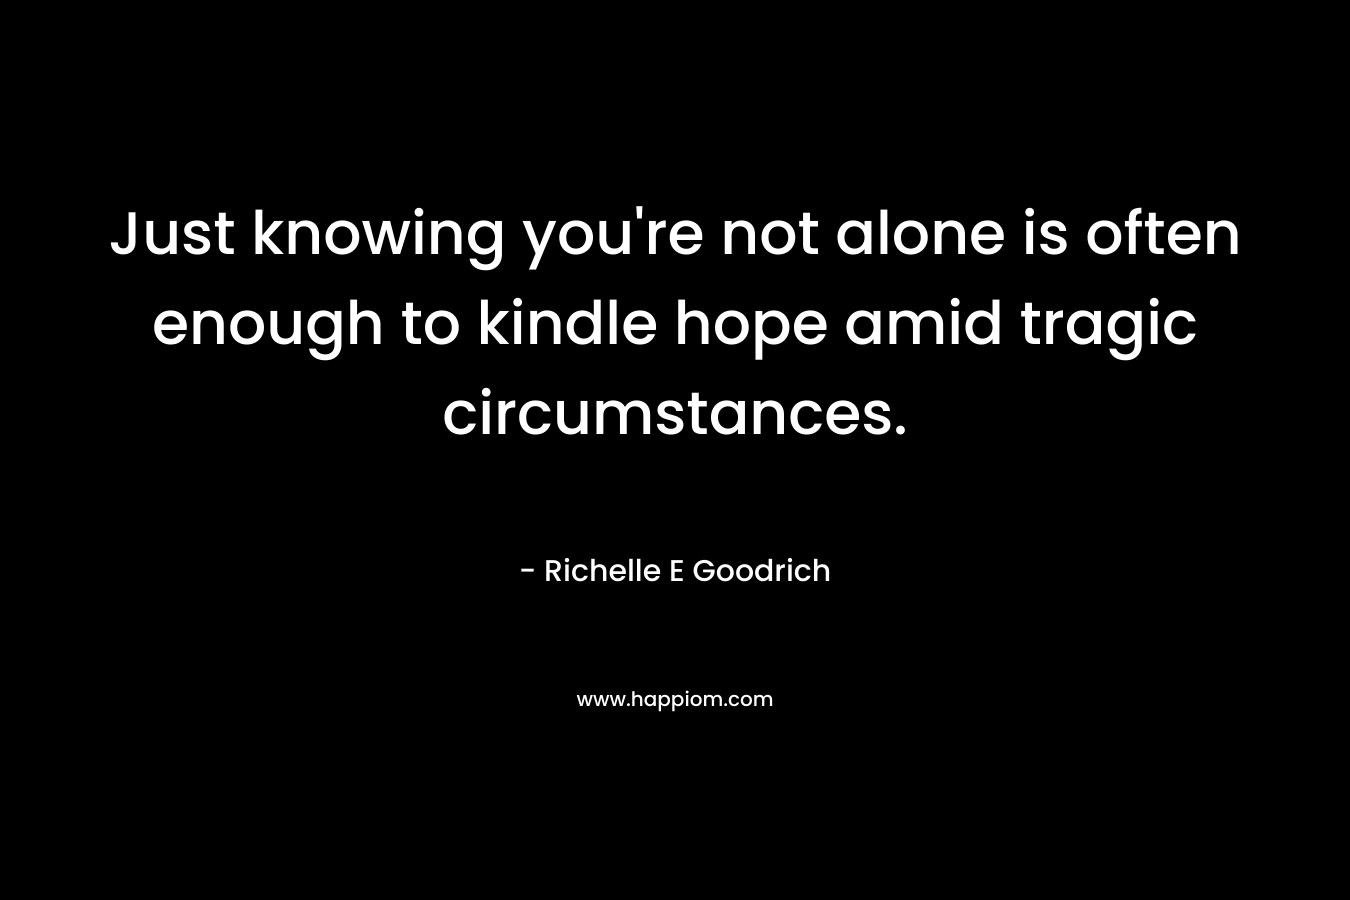 Just knowing you’re not alone is often enough to kindle hope amid tragic circumstances. – Richelle E Goodrich